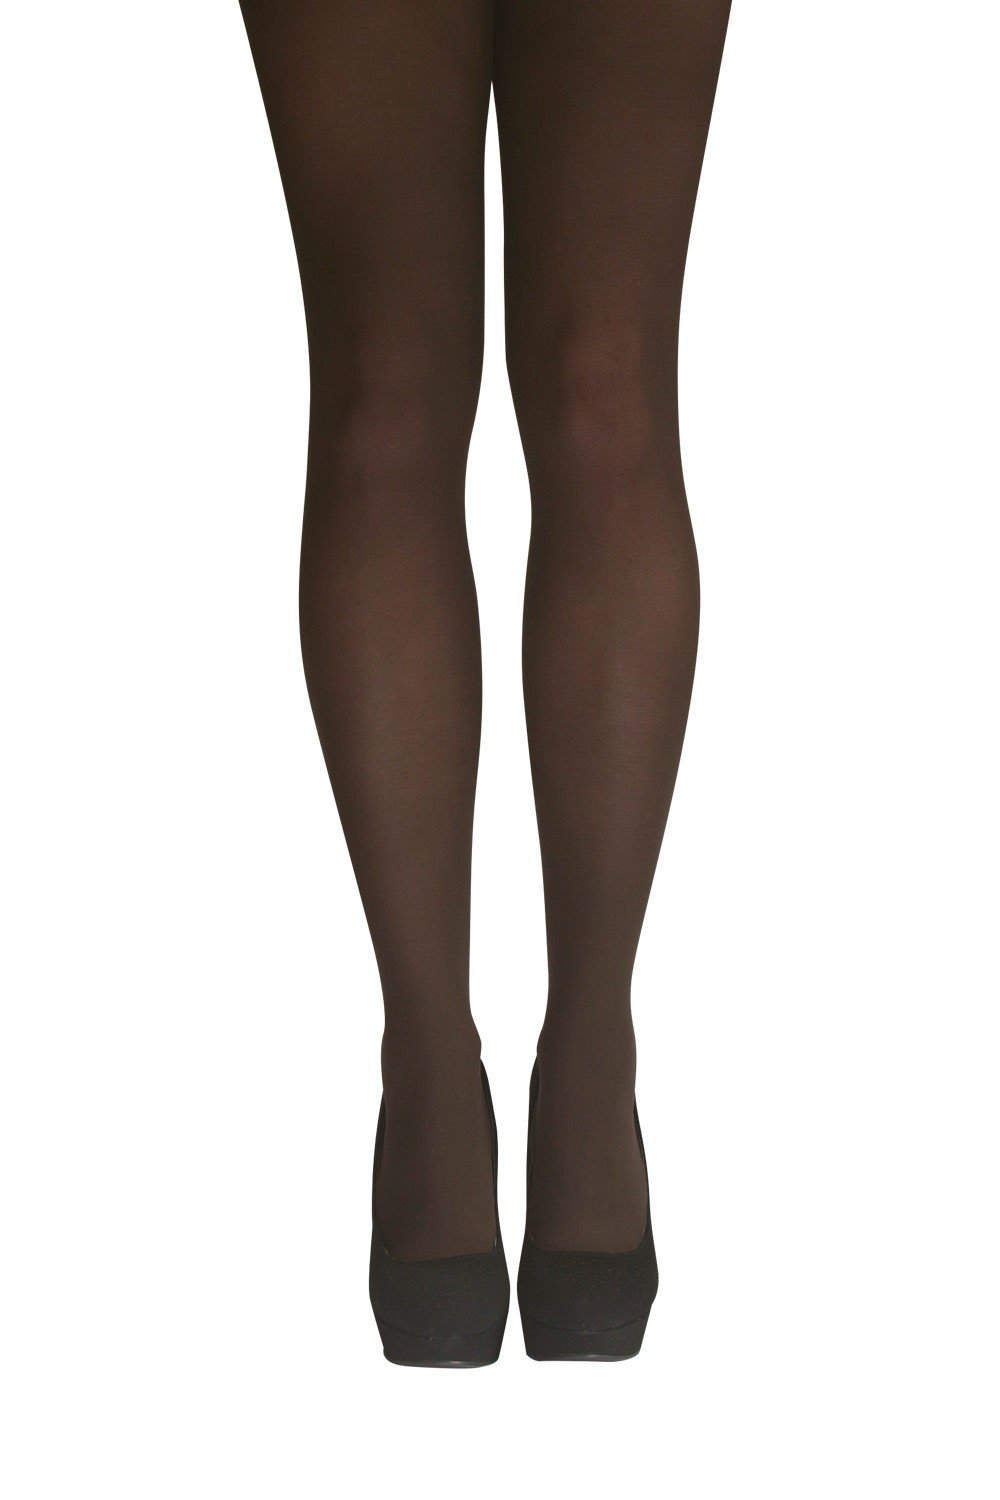 Columbine SOFT OPAQUES 50 Pantyhose/Tights - lacysouls